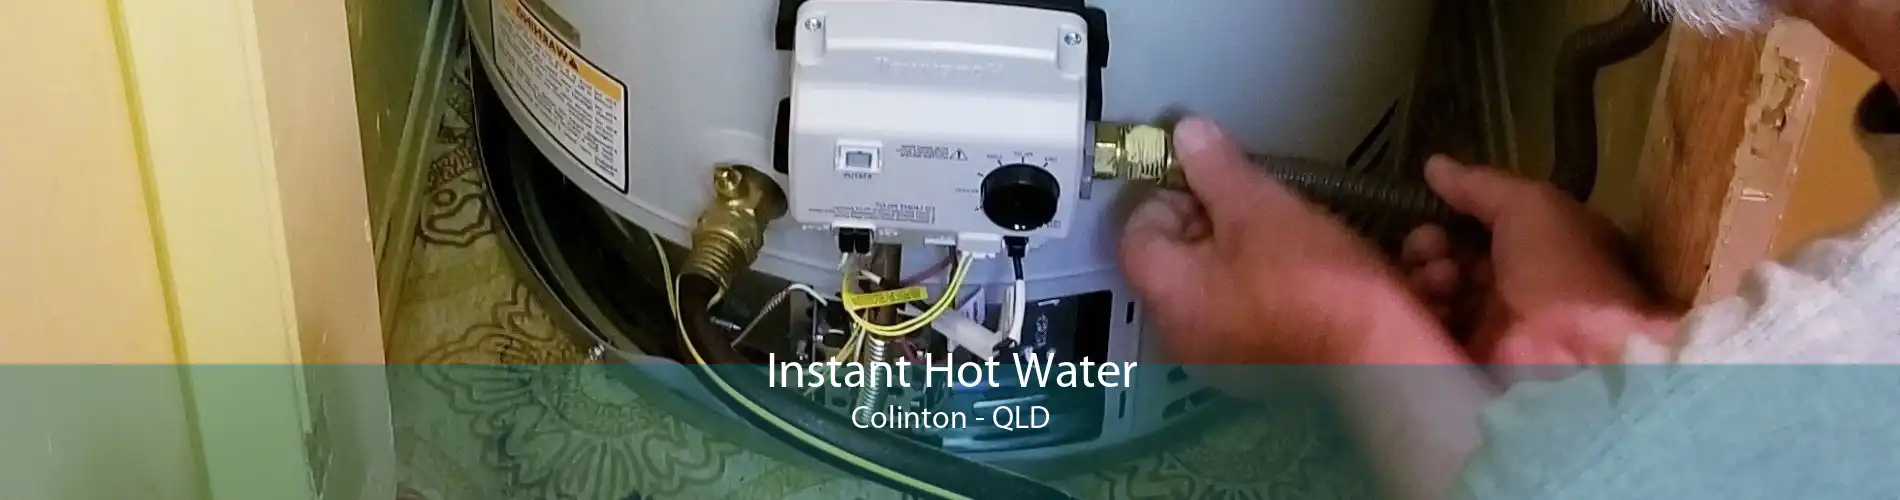 Instant Hot Water Colinton - QLD